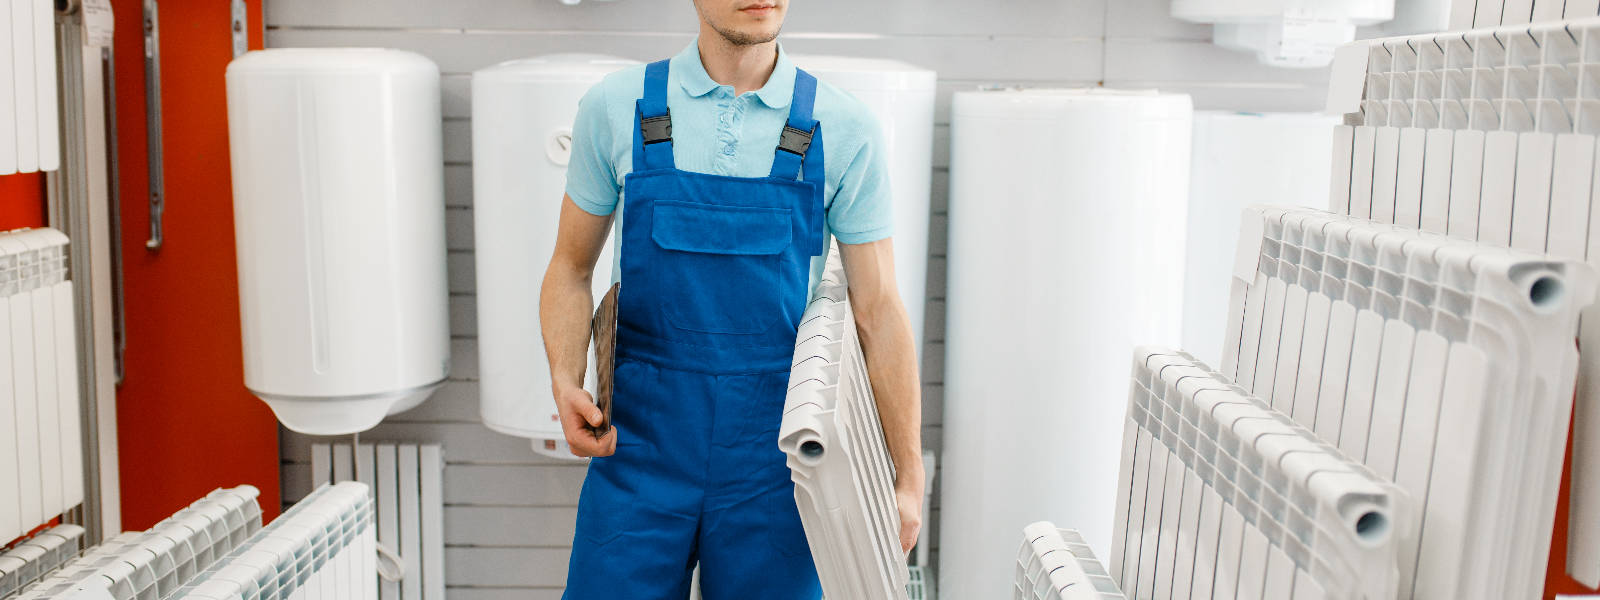 KAMPMAN OÜ - We specialize in comprehensive plumbing services, including installation, repair, and maintenance across Sou...